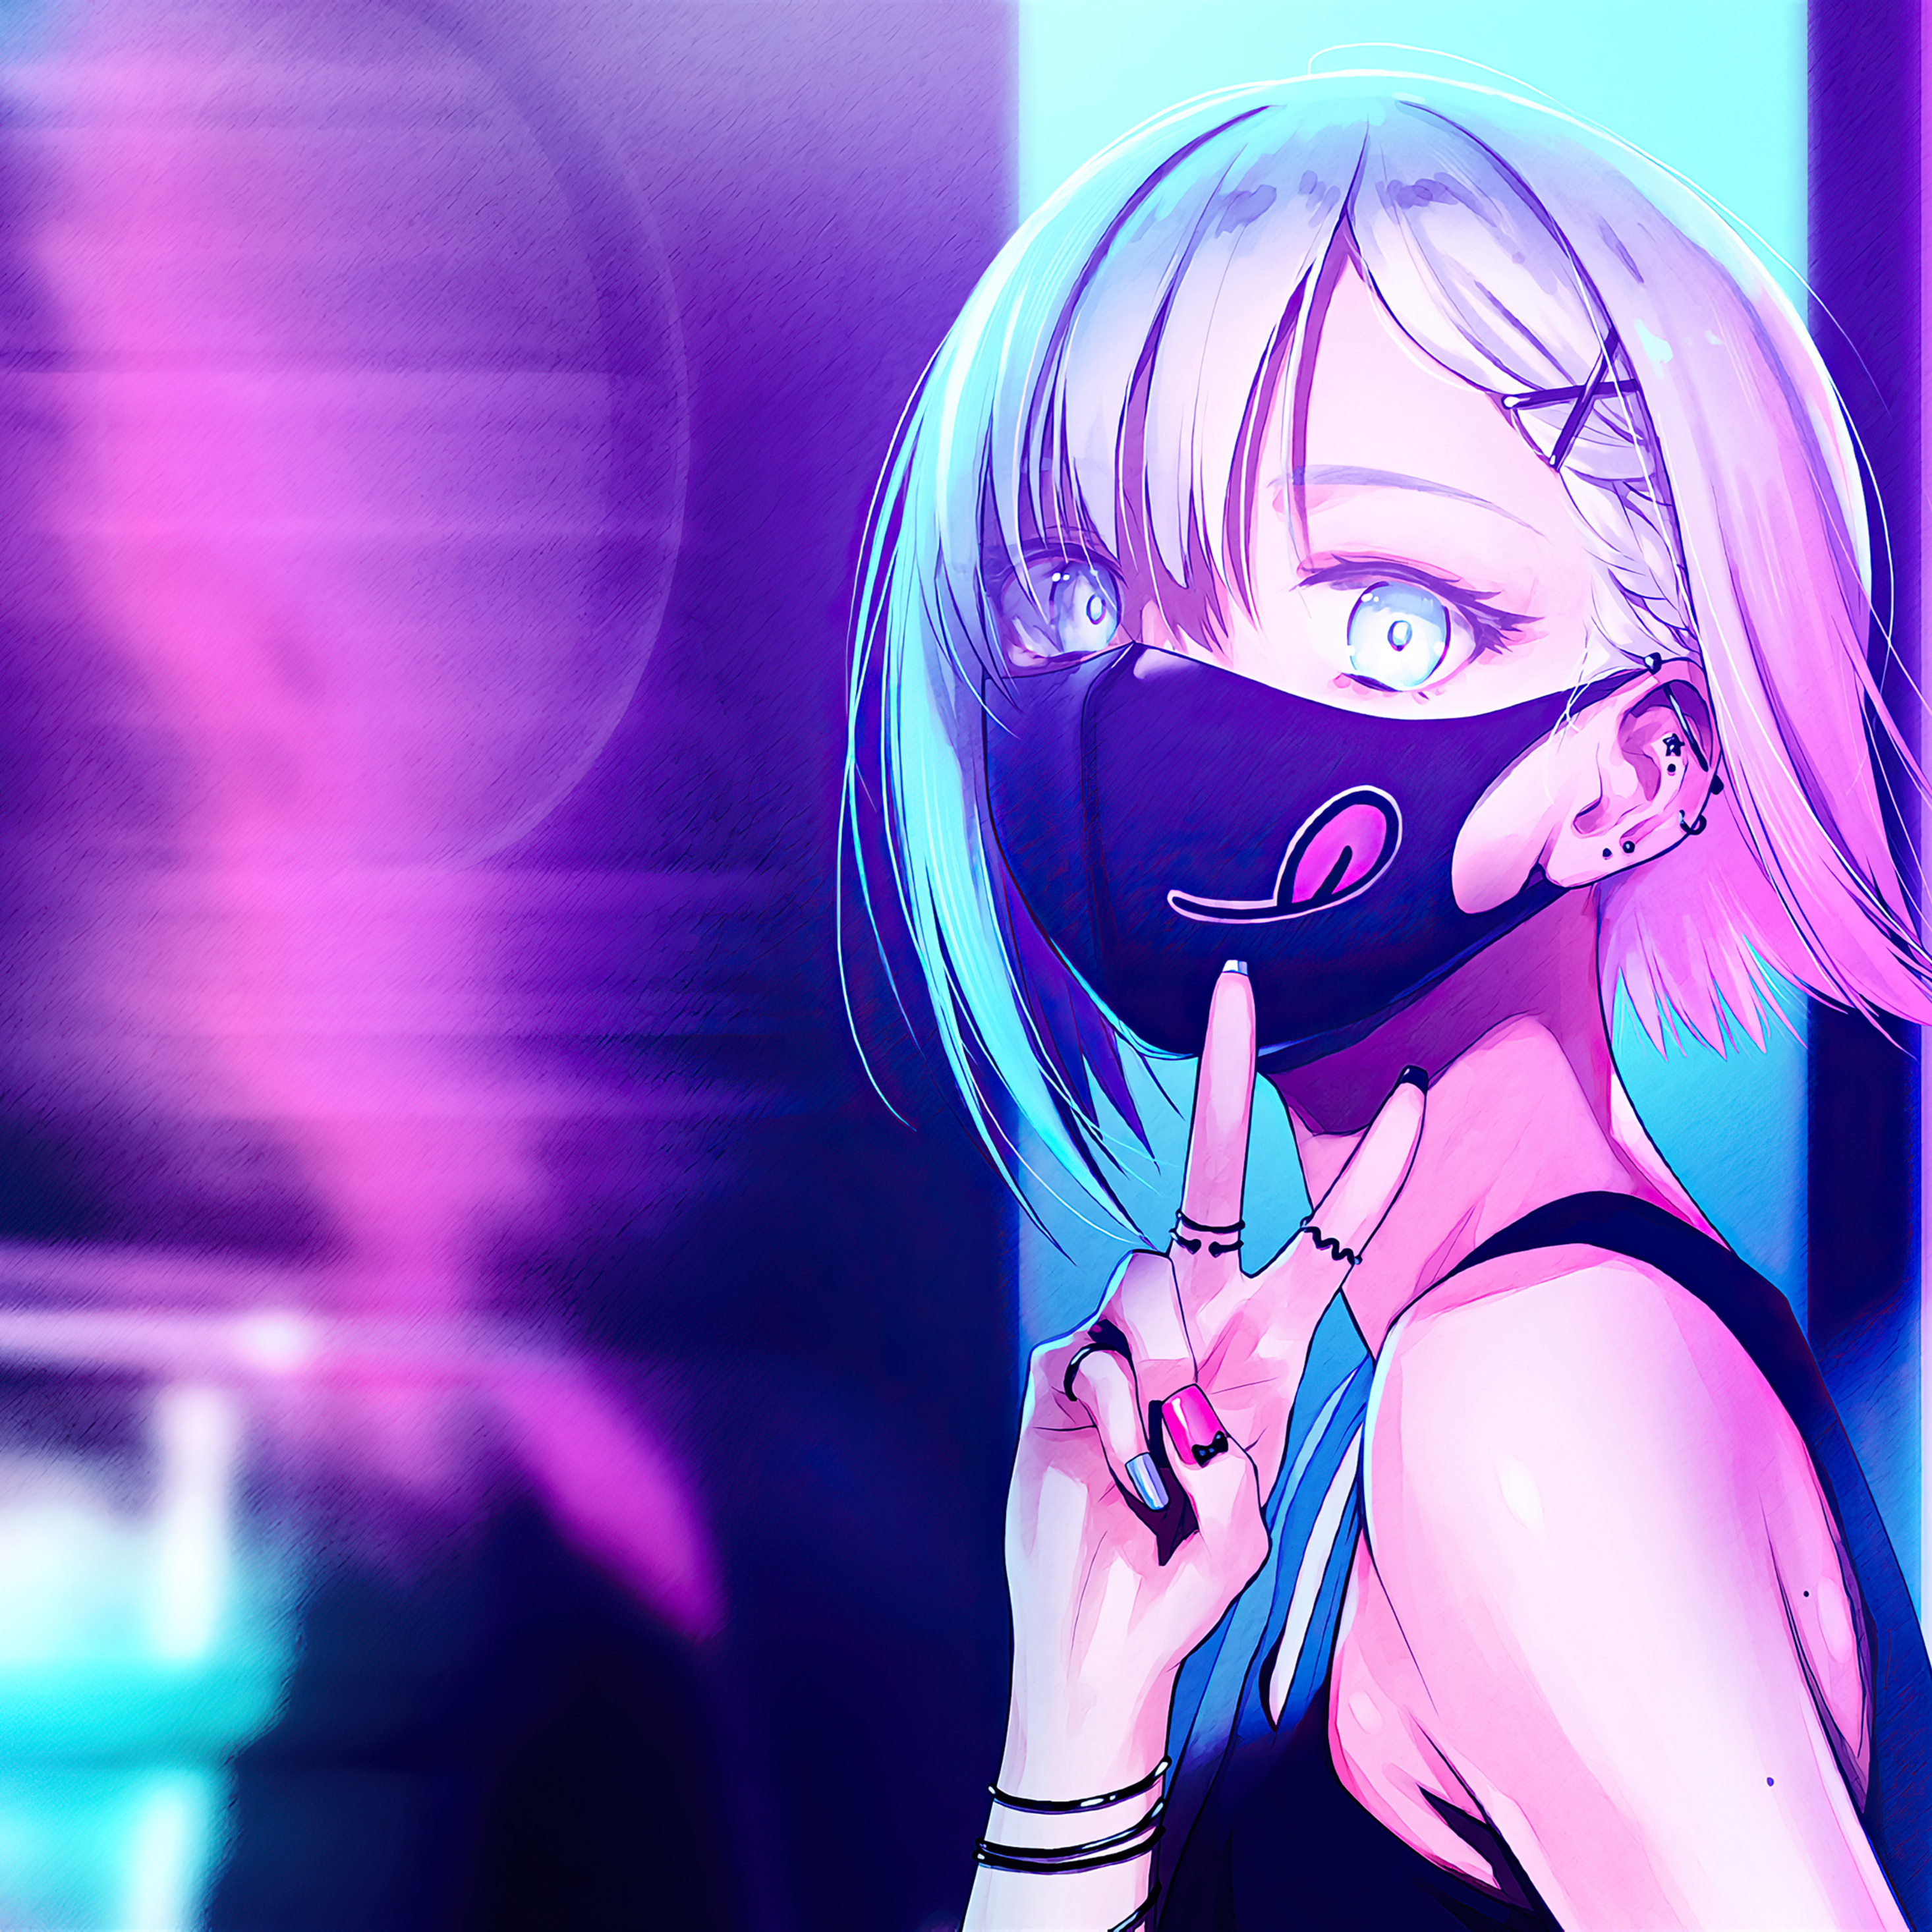 Anime Girl City Lights Neon Face Mask 4k iPad Pro Retina Display HD 4k Wallpaper, Image, Background, Photo and Picture